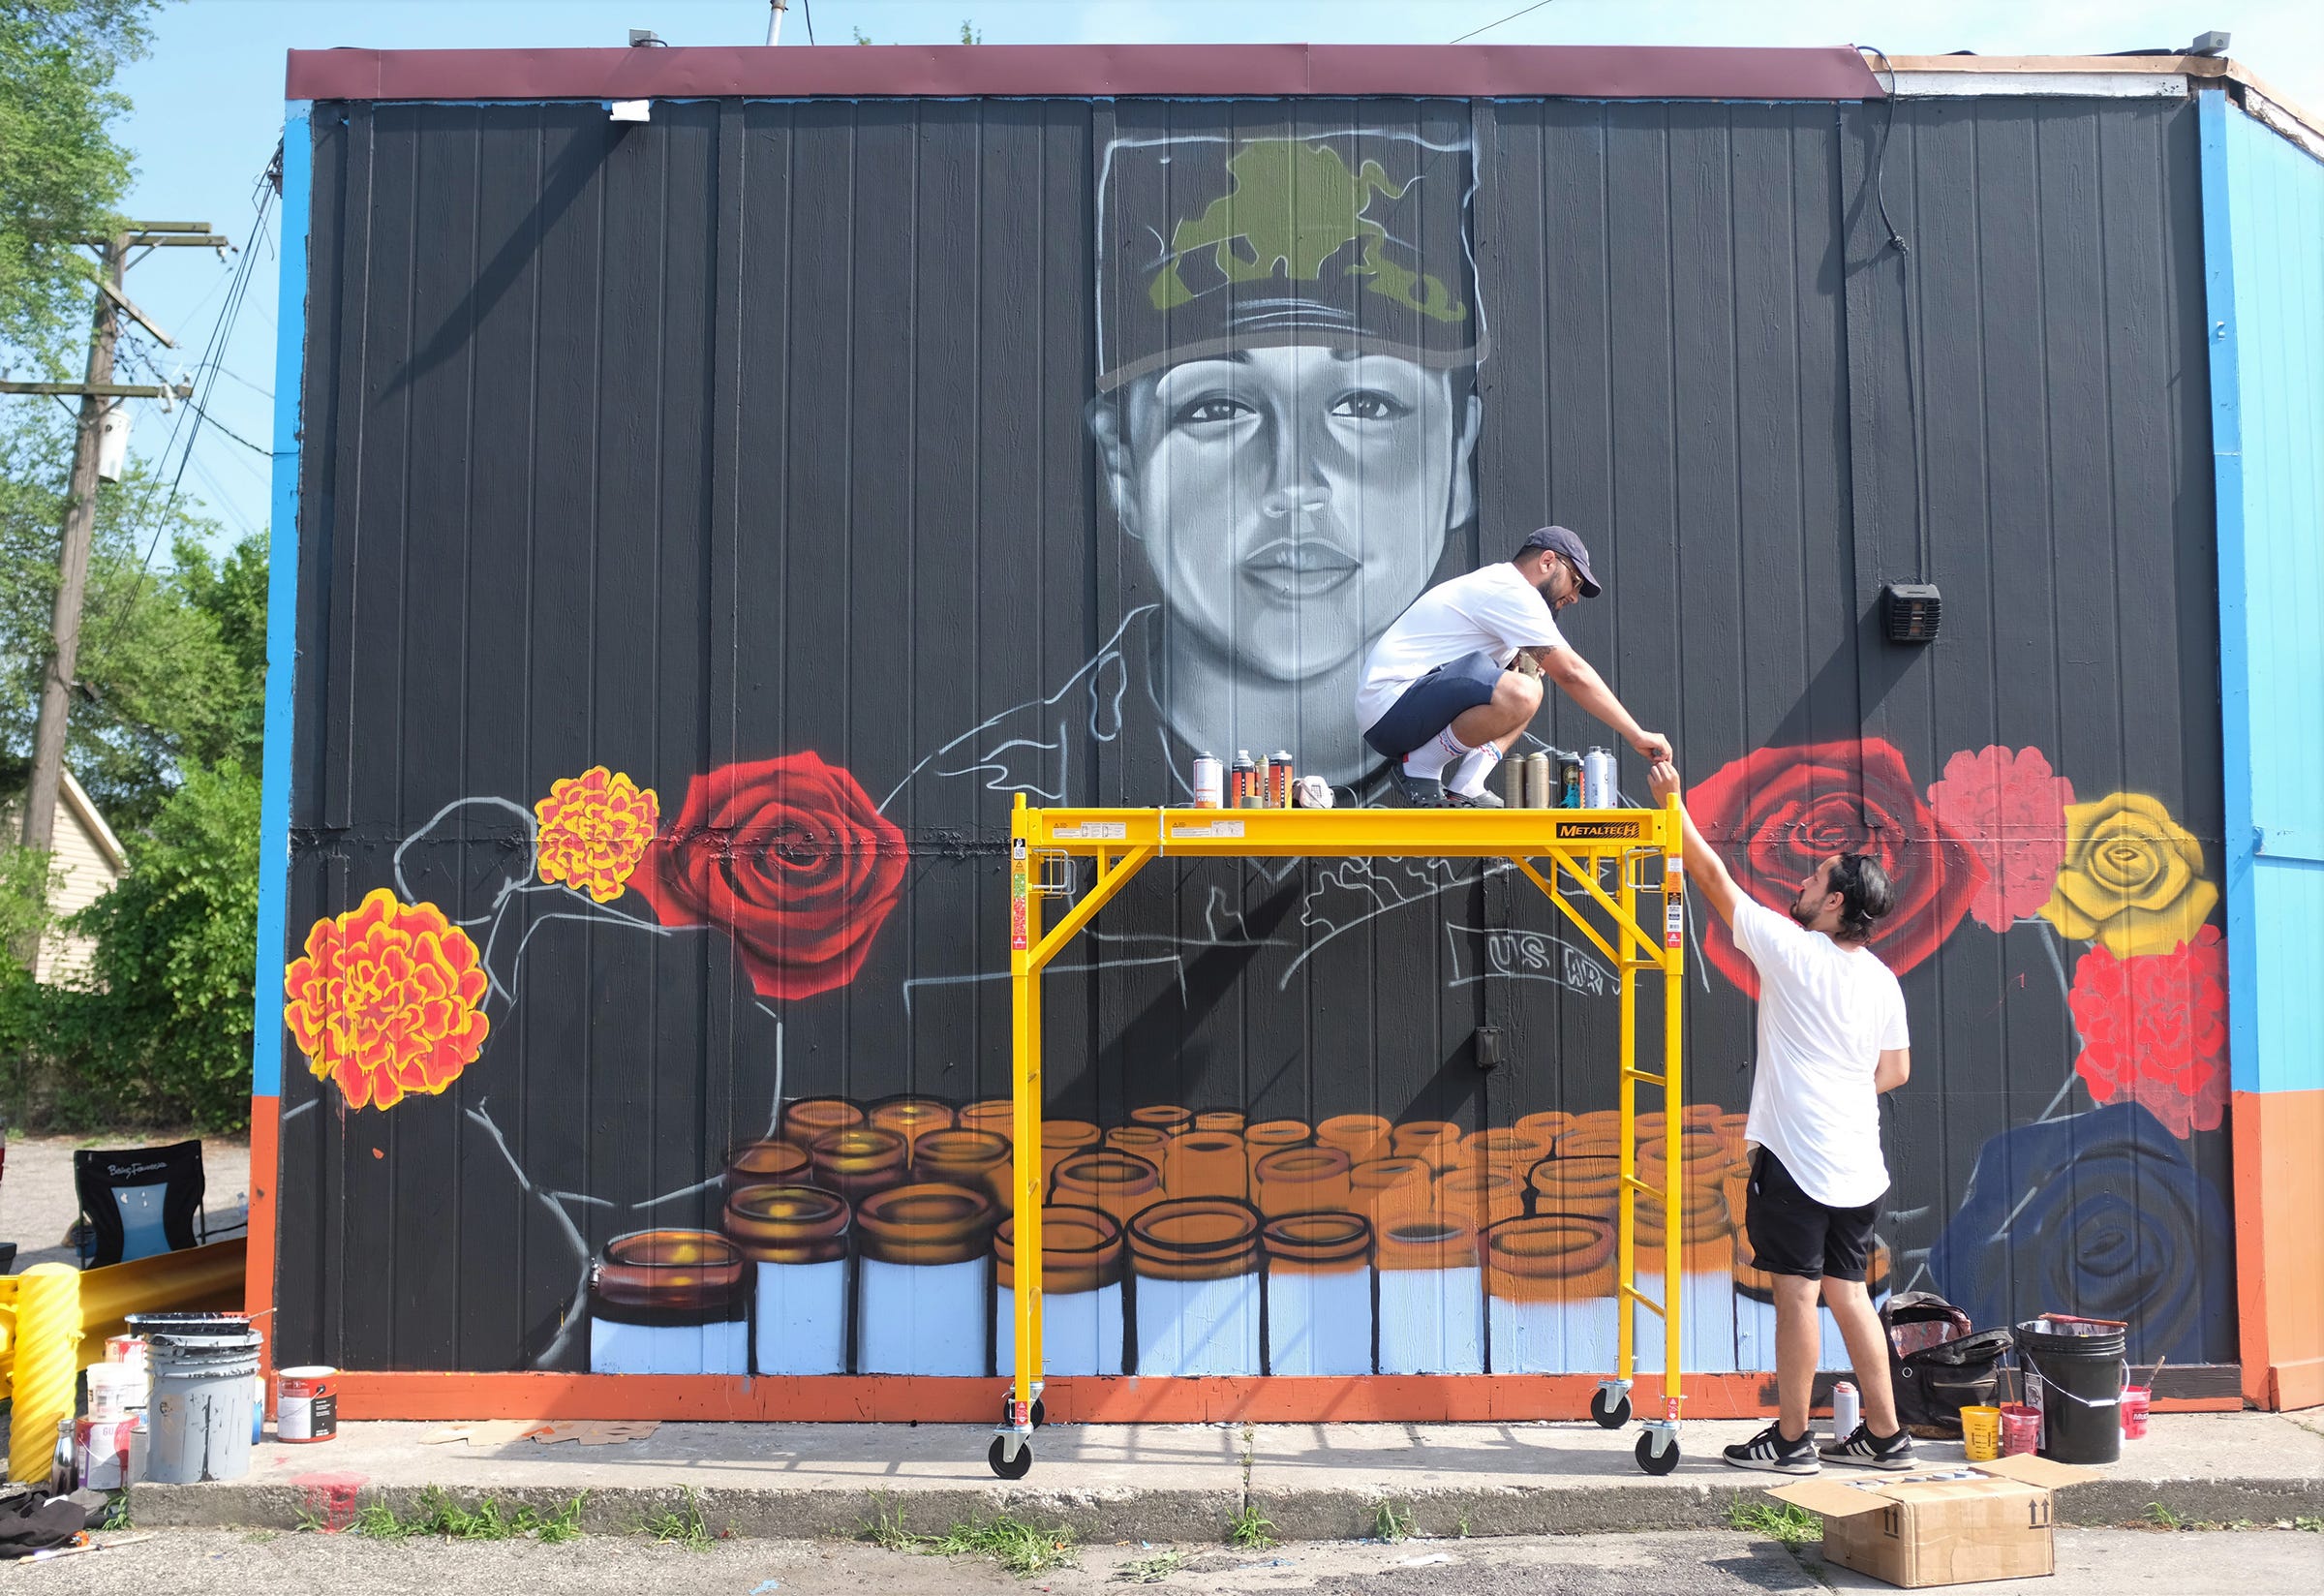 Muralist Freddy Diaz of Detroit creates a mural for Vanessa Guillen, the army soldier who went missing from Fort Hood, in Central Texas on April 22, 2020. With the help of Yahaira Gomez of Detroit who raised funds for the mural and Gabriel Martinez, the owner of Bodega Cat who allowed the mural to be painted on his building, the mural will be unveiled on Saturday.